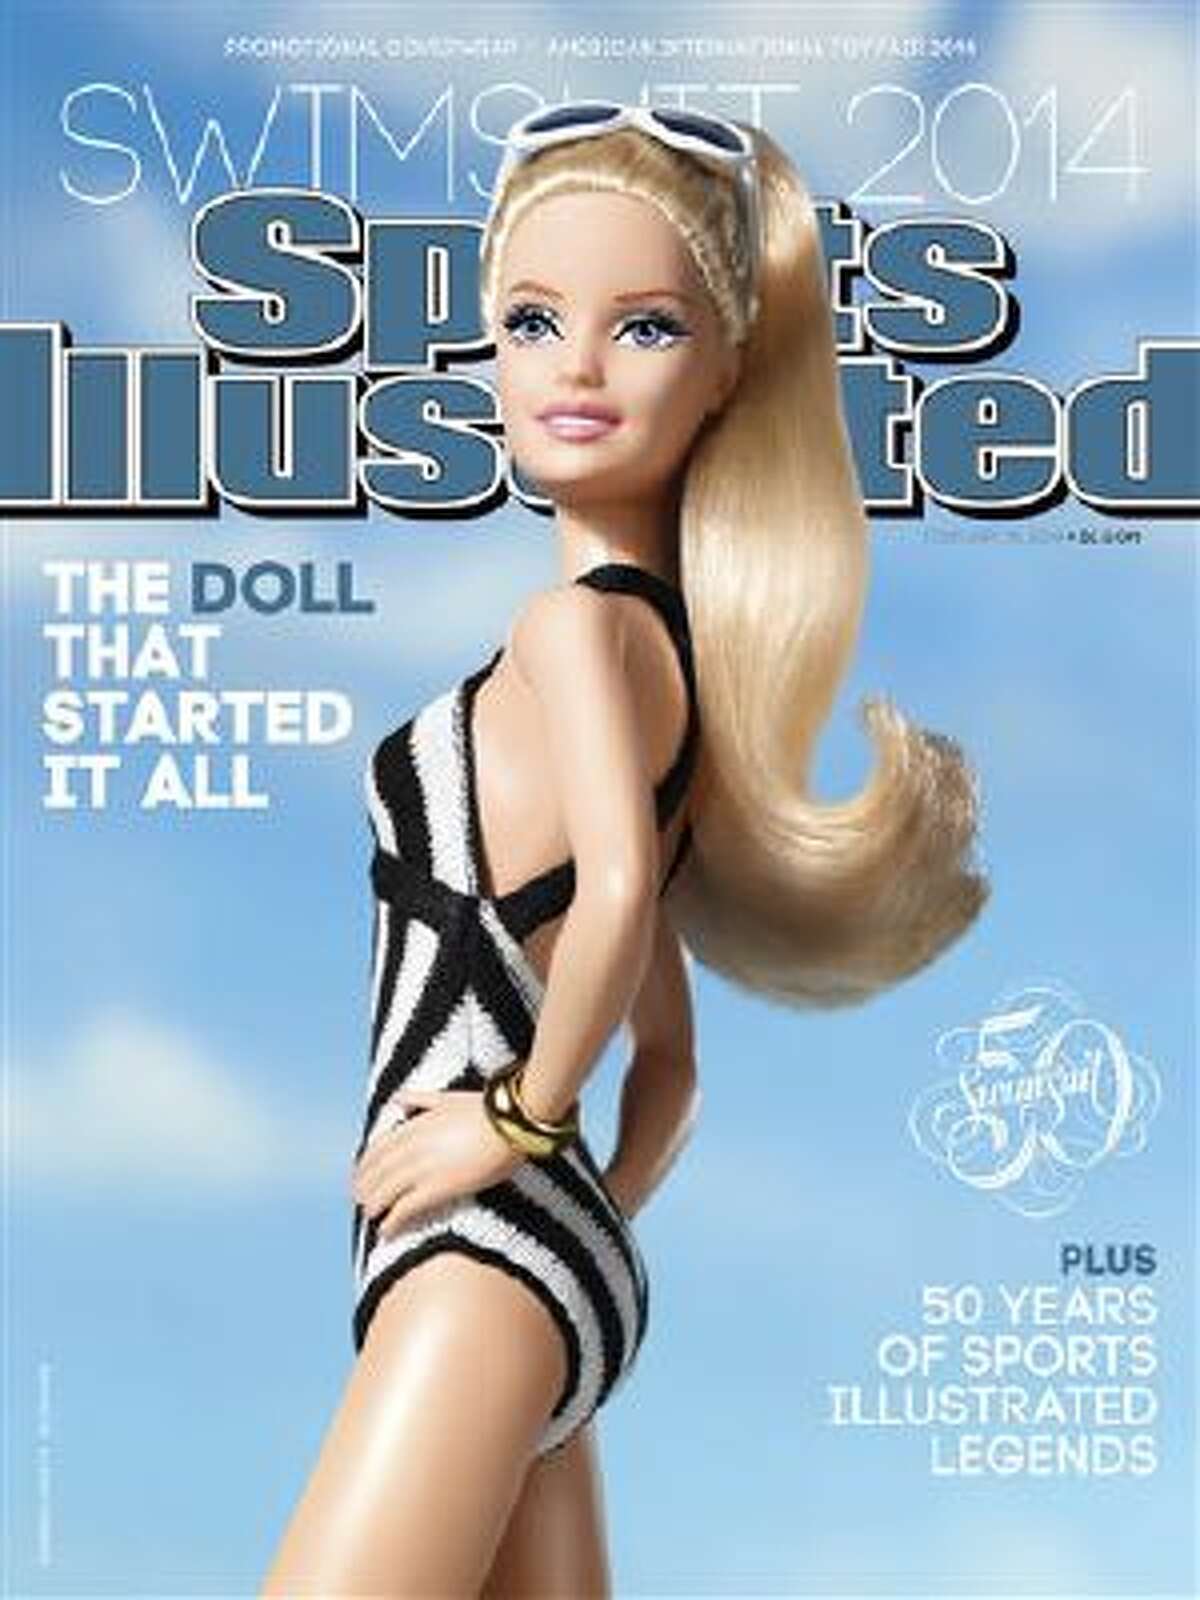 This image provided by Sports Illustrated shows the cover-wrap of the magazine's 50th anniversary annual swimsuit issue.